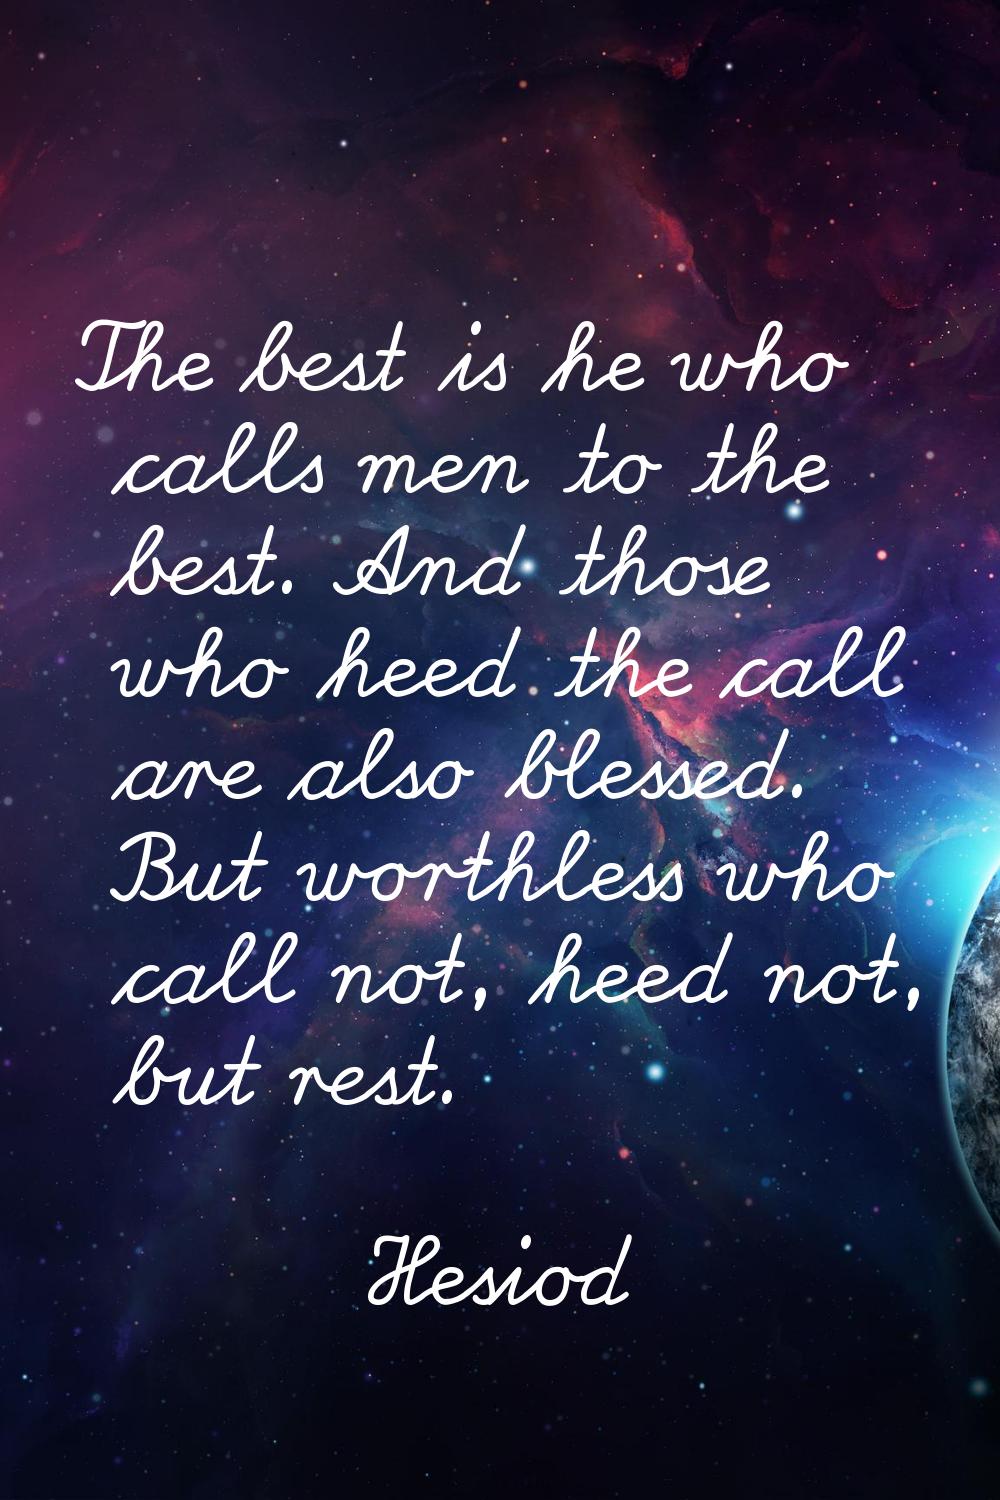 The best is he who calls men to the best. And those who heed the call are also blessed. But worthle